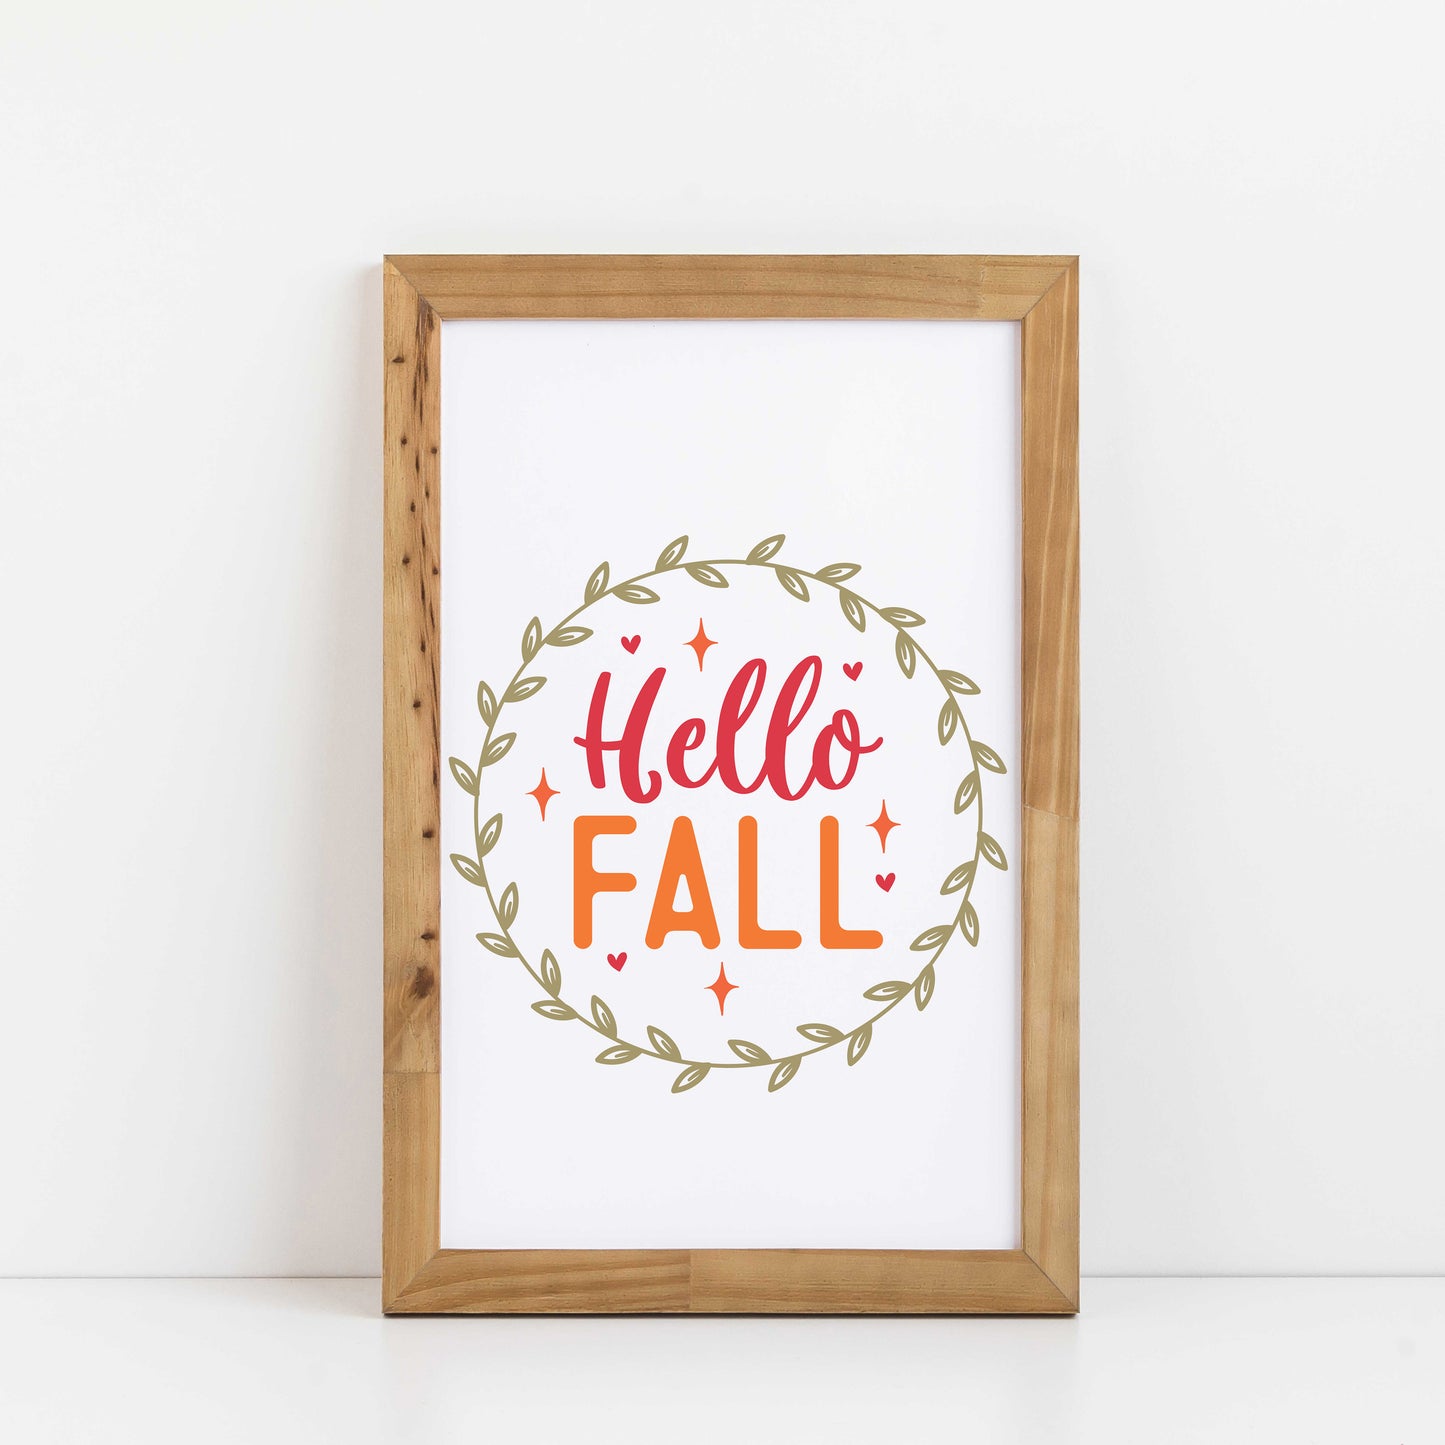 "Hello Fall With Wreath" Graphic